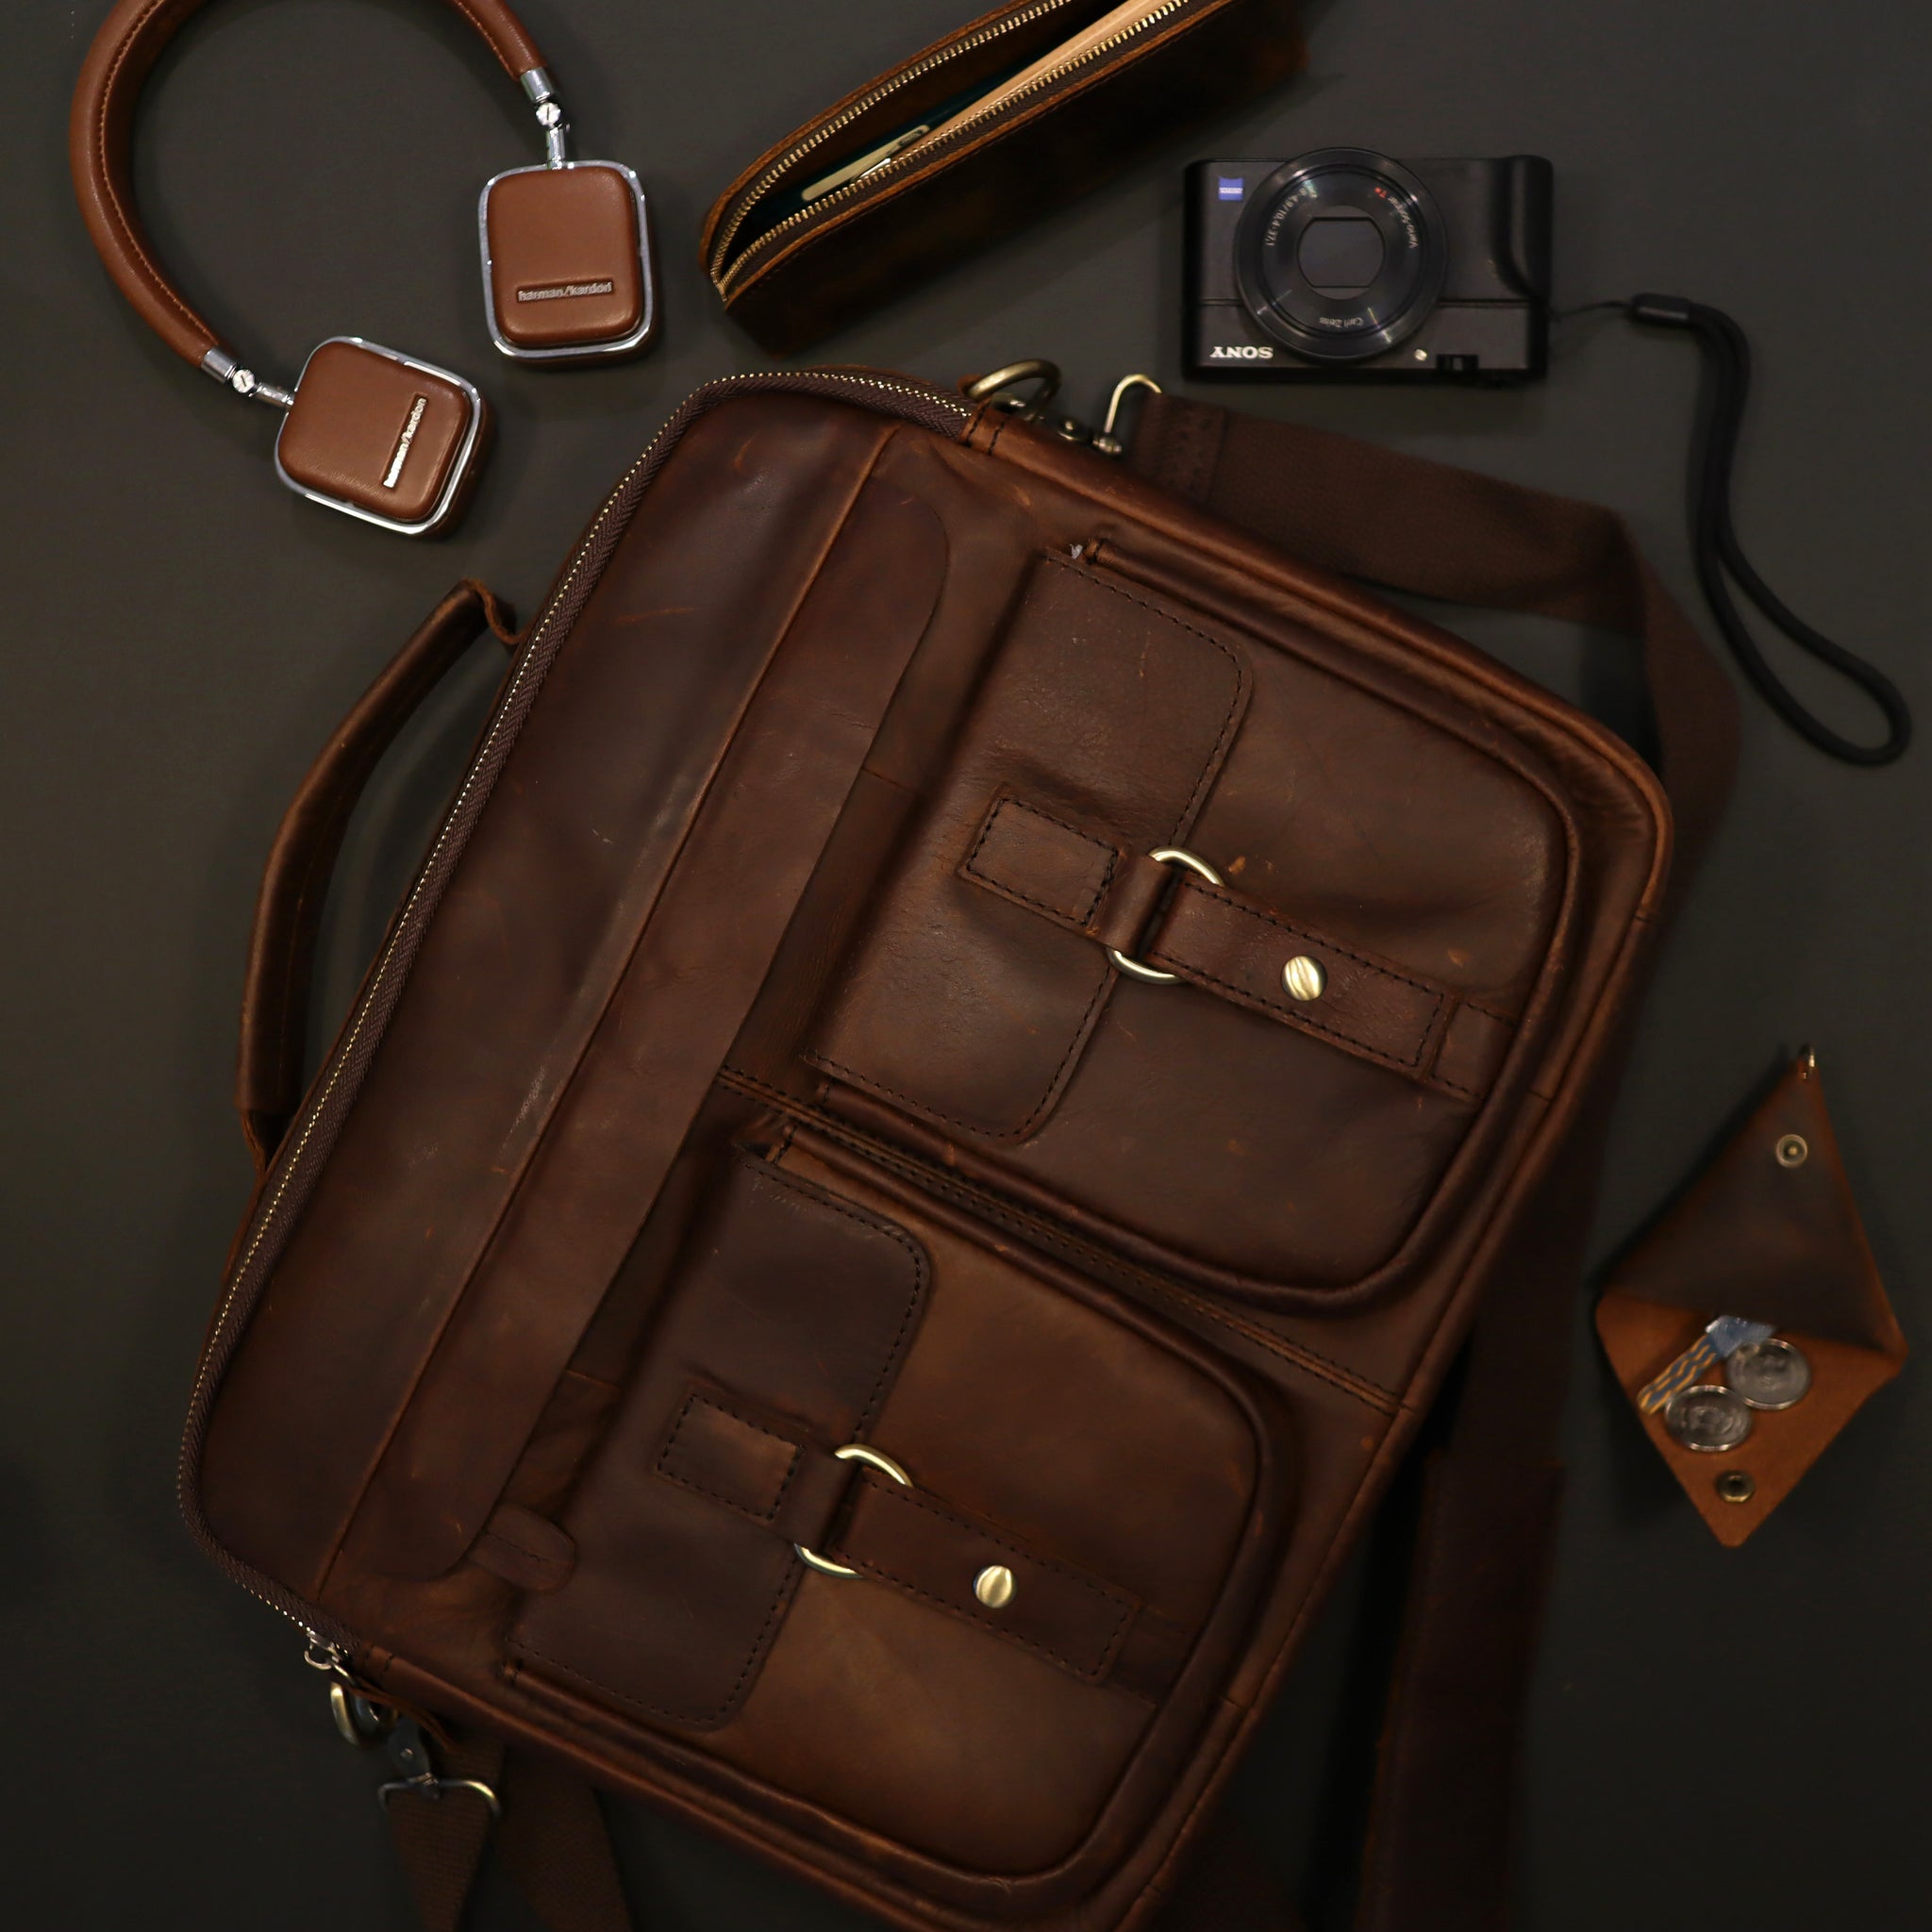 The Courier - Leather Briefcase - mdbm.uk